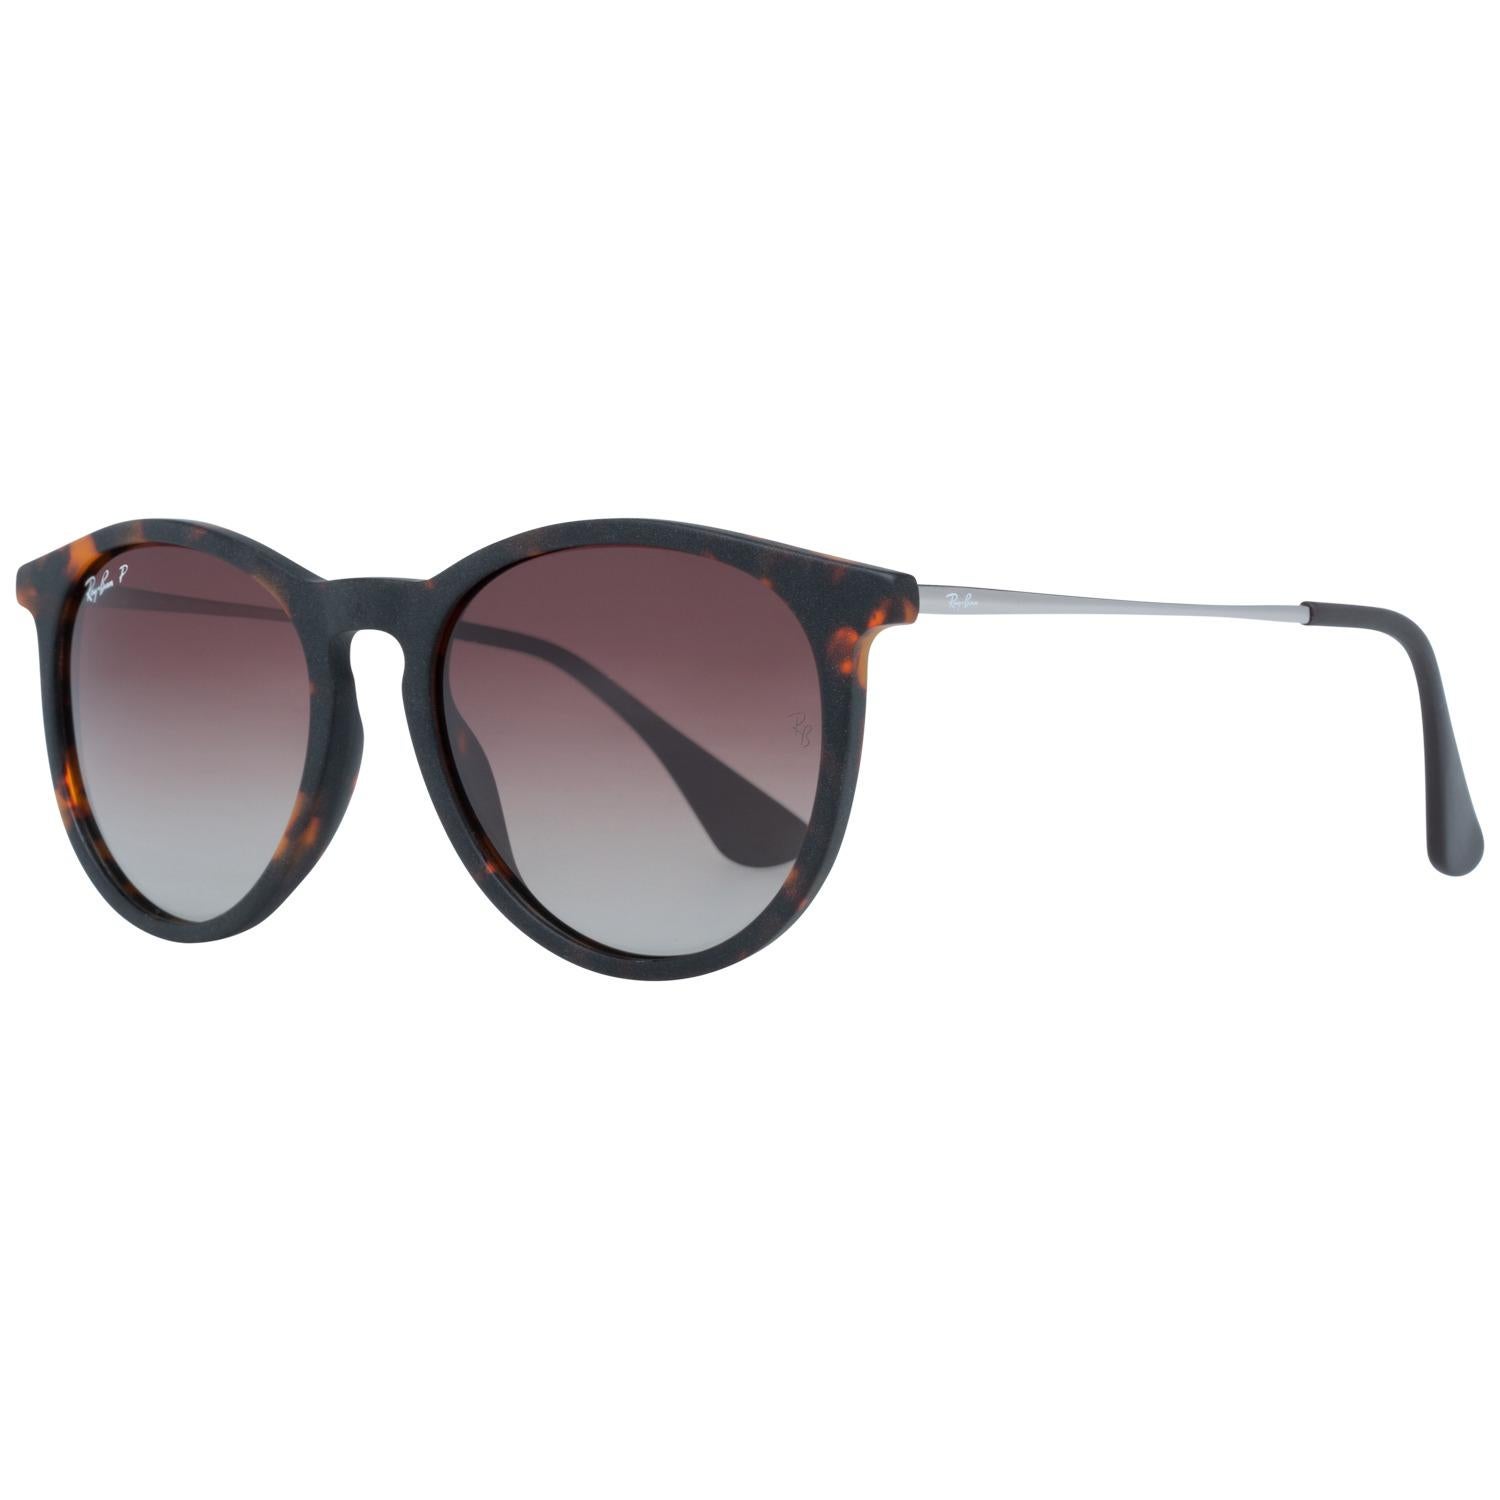 DetailsMATERIAL: MetalCOLOR: BrownMODEL: RB4171F 865/13 54GENDER: WomenCOUNTRY OF MANUFACTURE: ItalyTYPE: SunglassesORIGINAL CASE?: YesSTYLE: OvalOCCASION: CasualFEATURES: LightweightLENS COLOR: BrownLENS TECHNOLOGY: PolarizedYEAR MANUFACTURED: